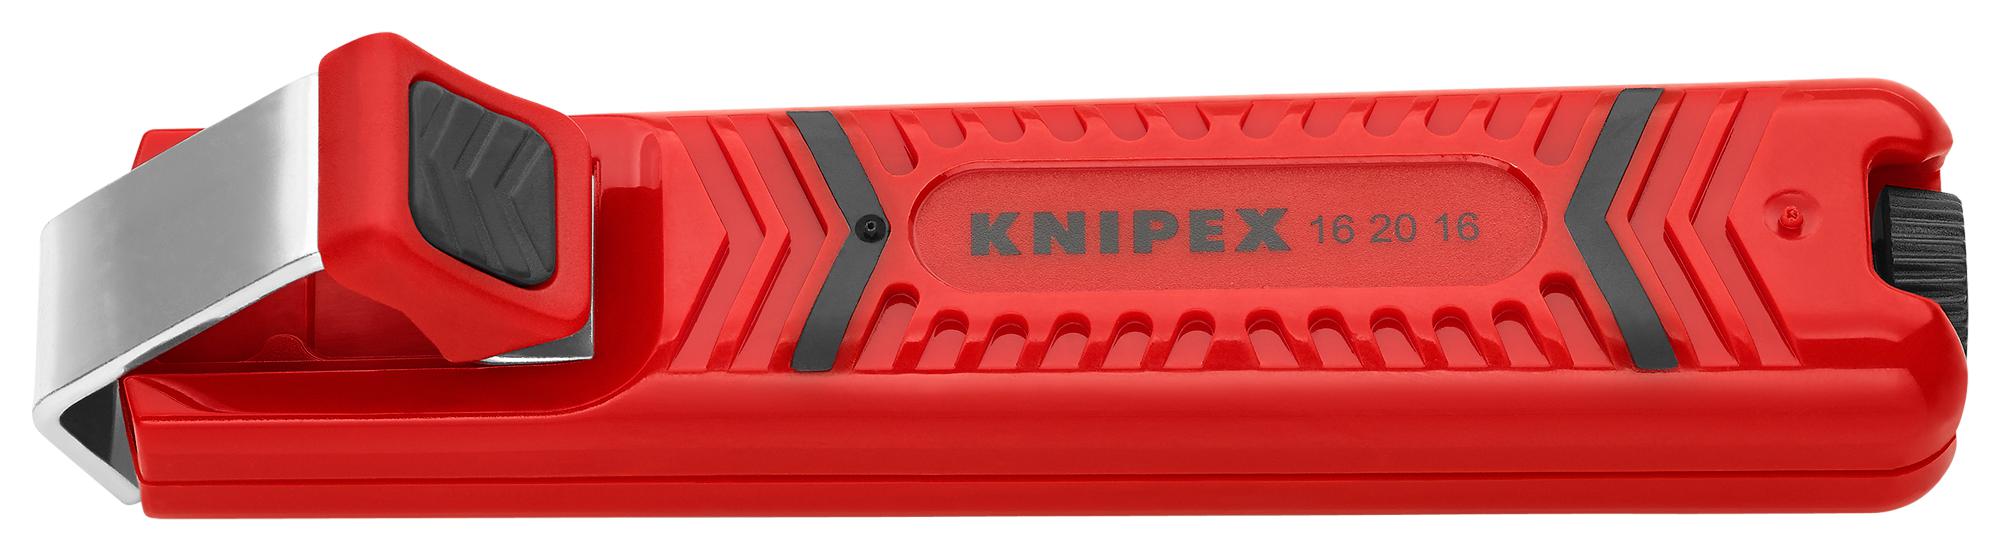 16 20 16 SB CABLE STRIPPING TOOL, 4-16MM KNIPEX